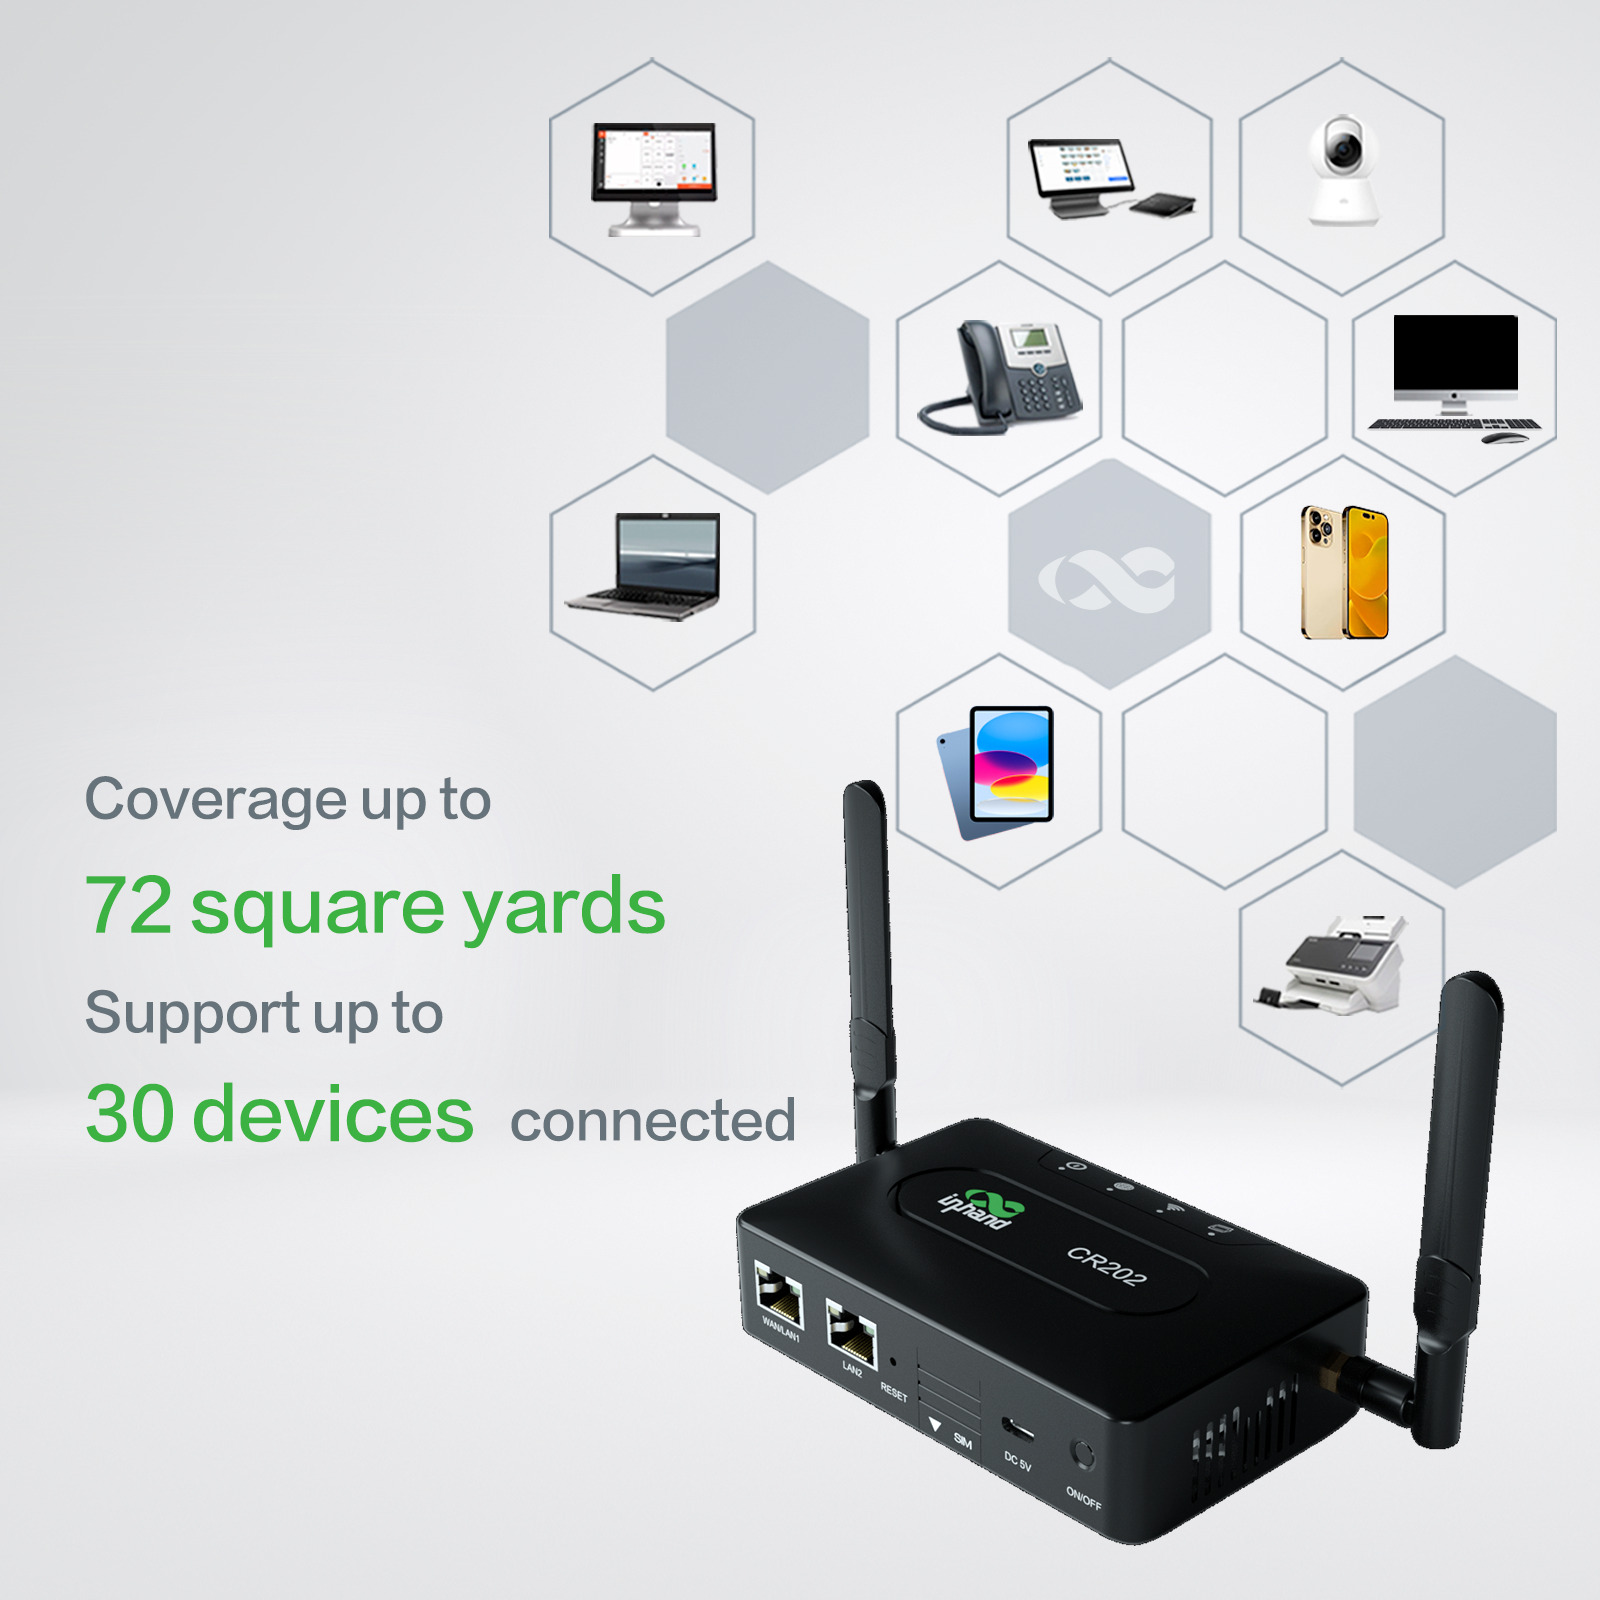 InHand 4G LTE CAT 6 Portable Router WiFi LAN WAN Hotspot for Road Trip RV Camp